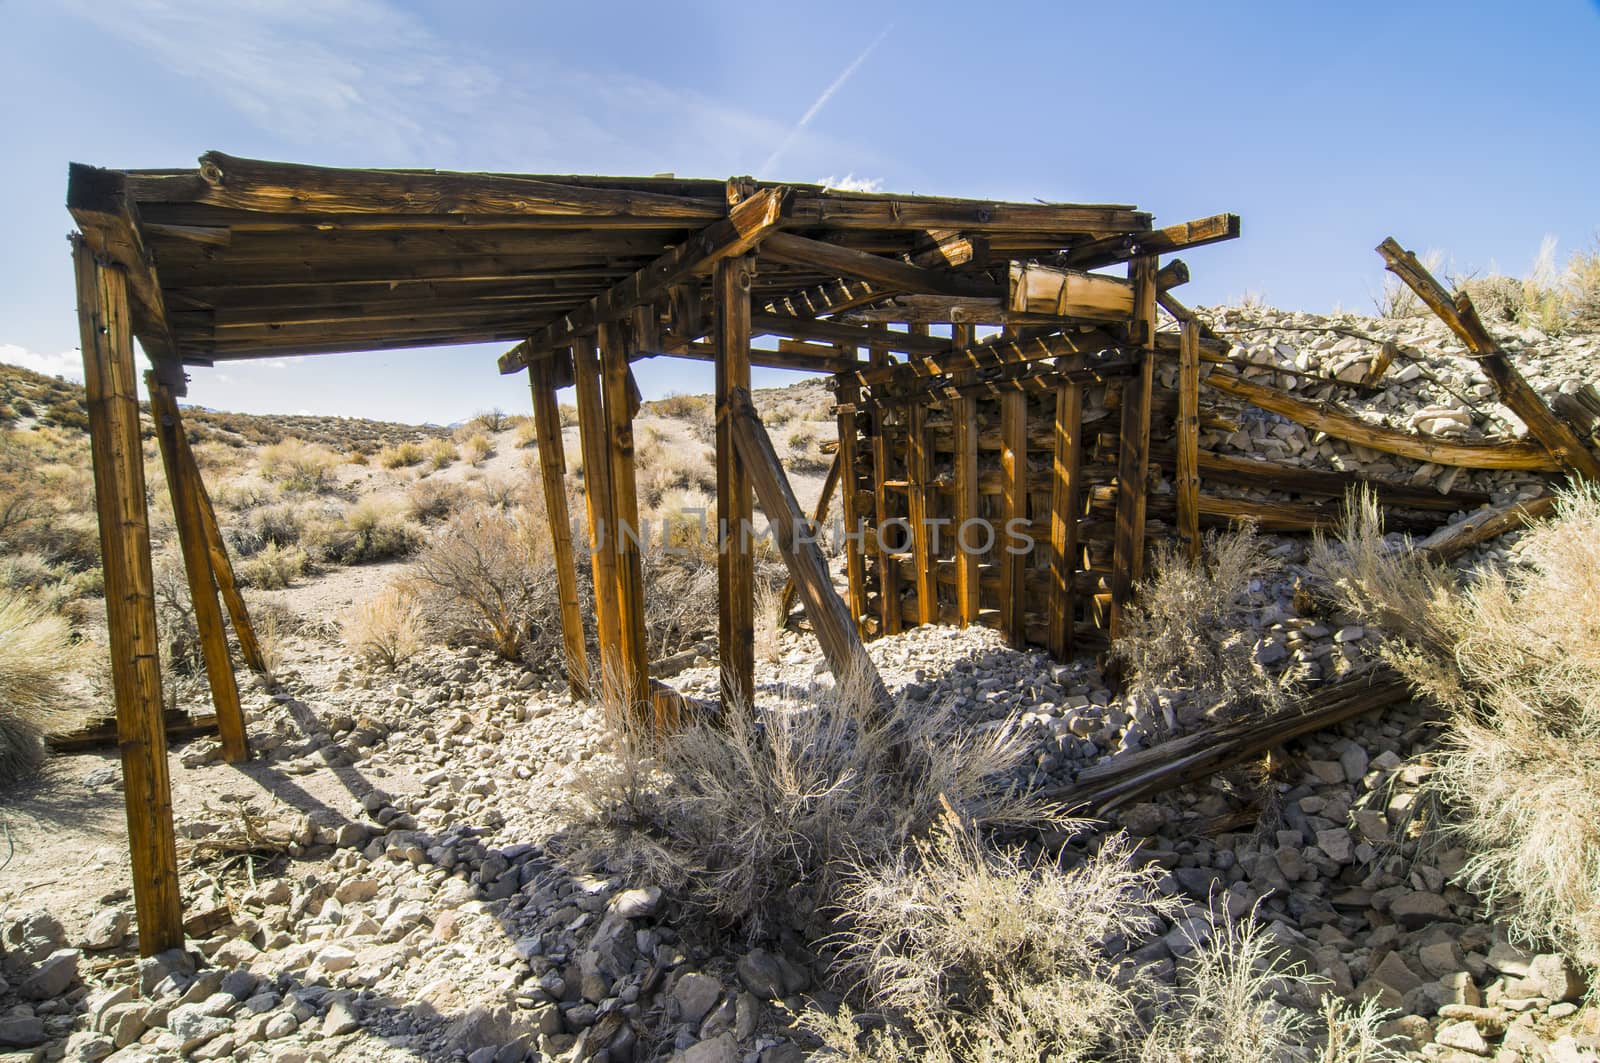 Boarded up old pumice mine shaft, Mono County California by Njean